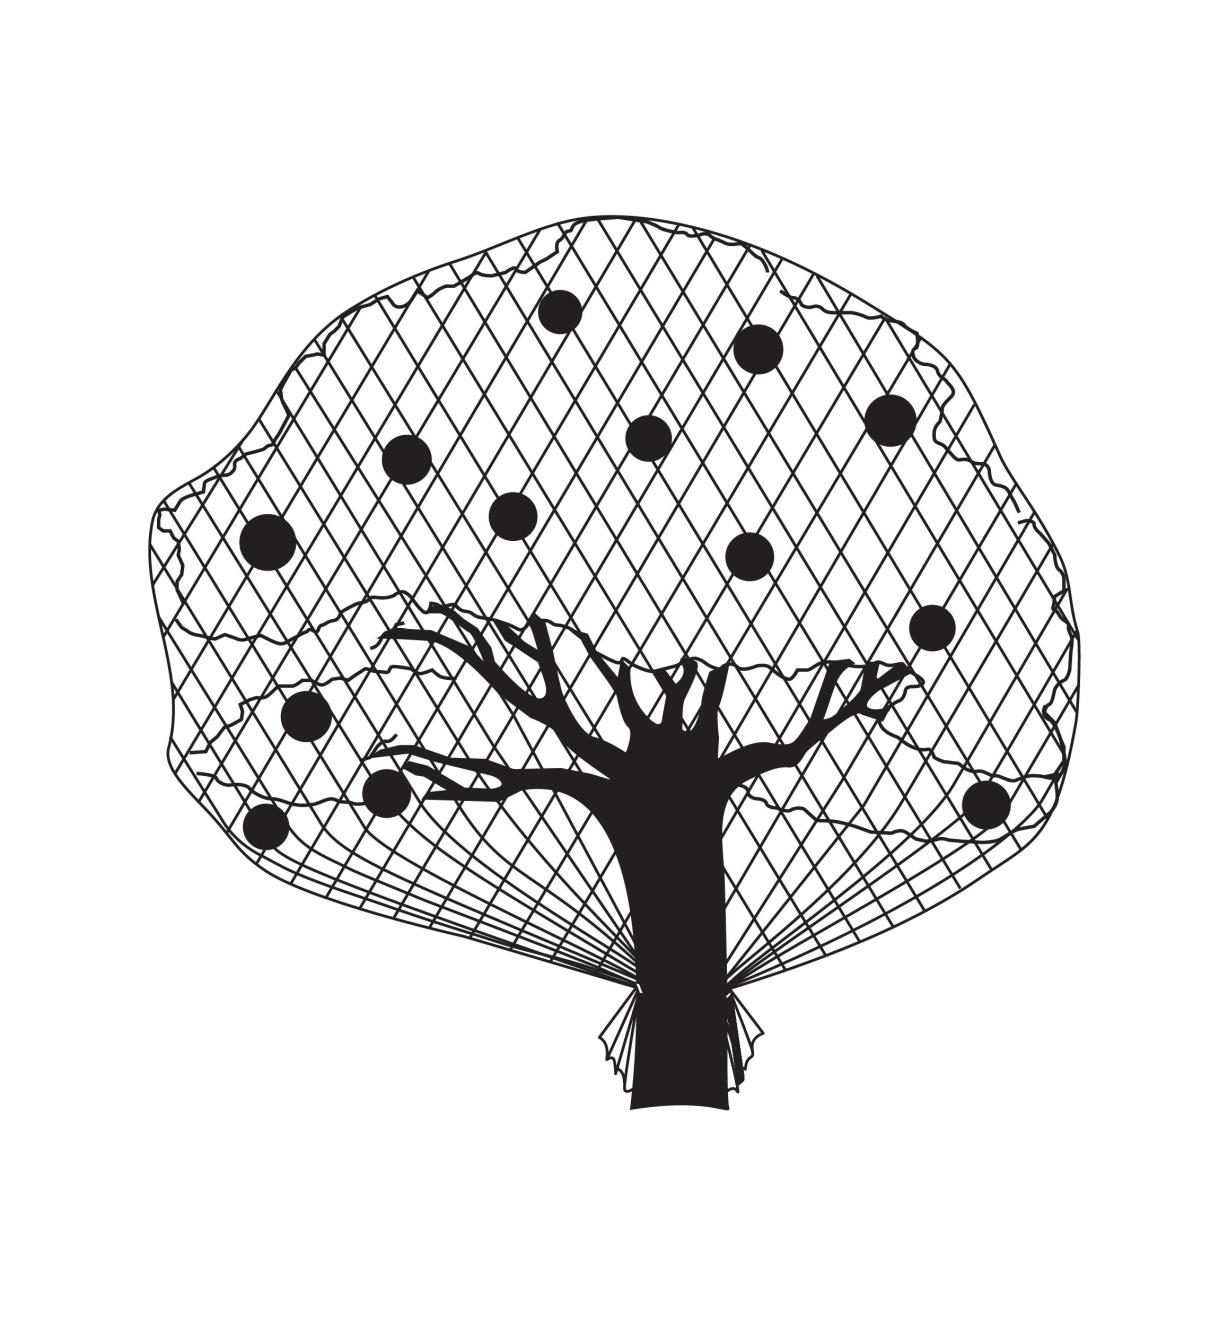 Illustrated example of a fruit tree covered in garden netting